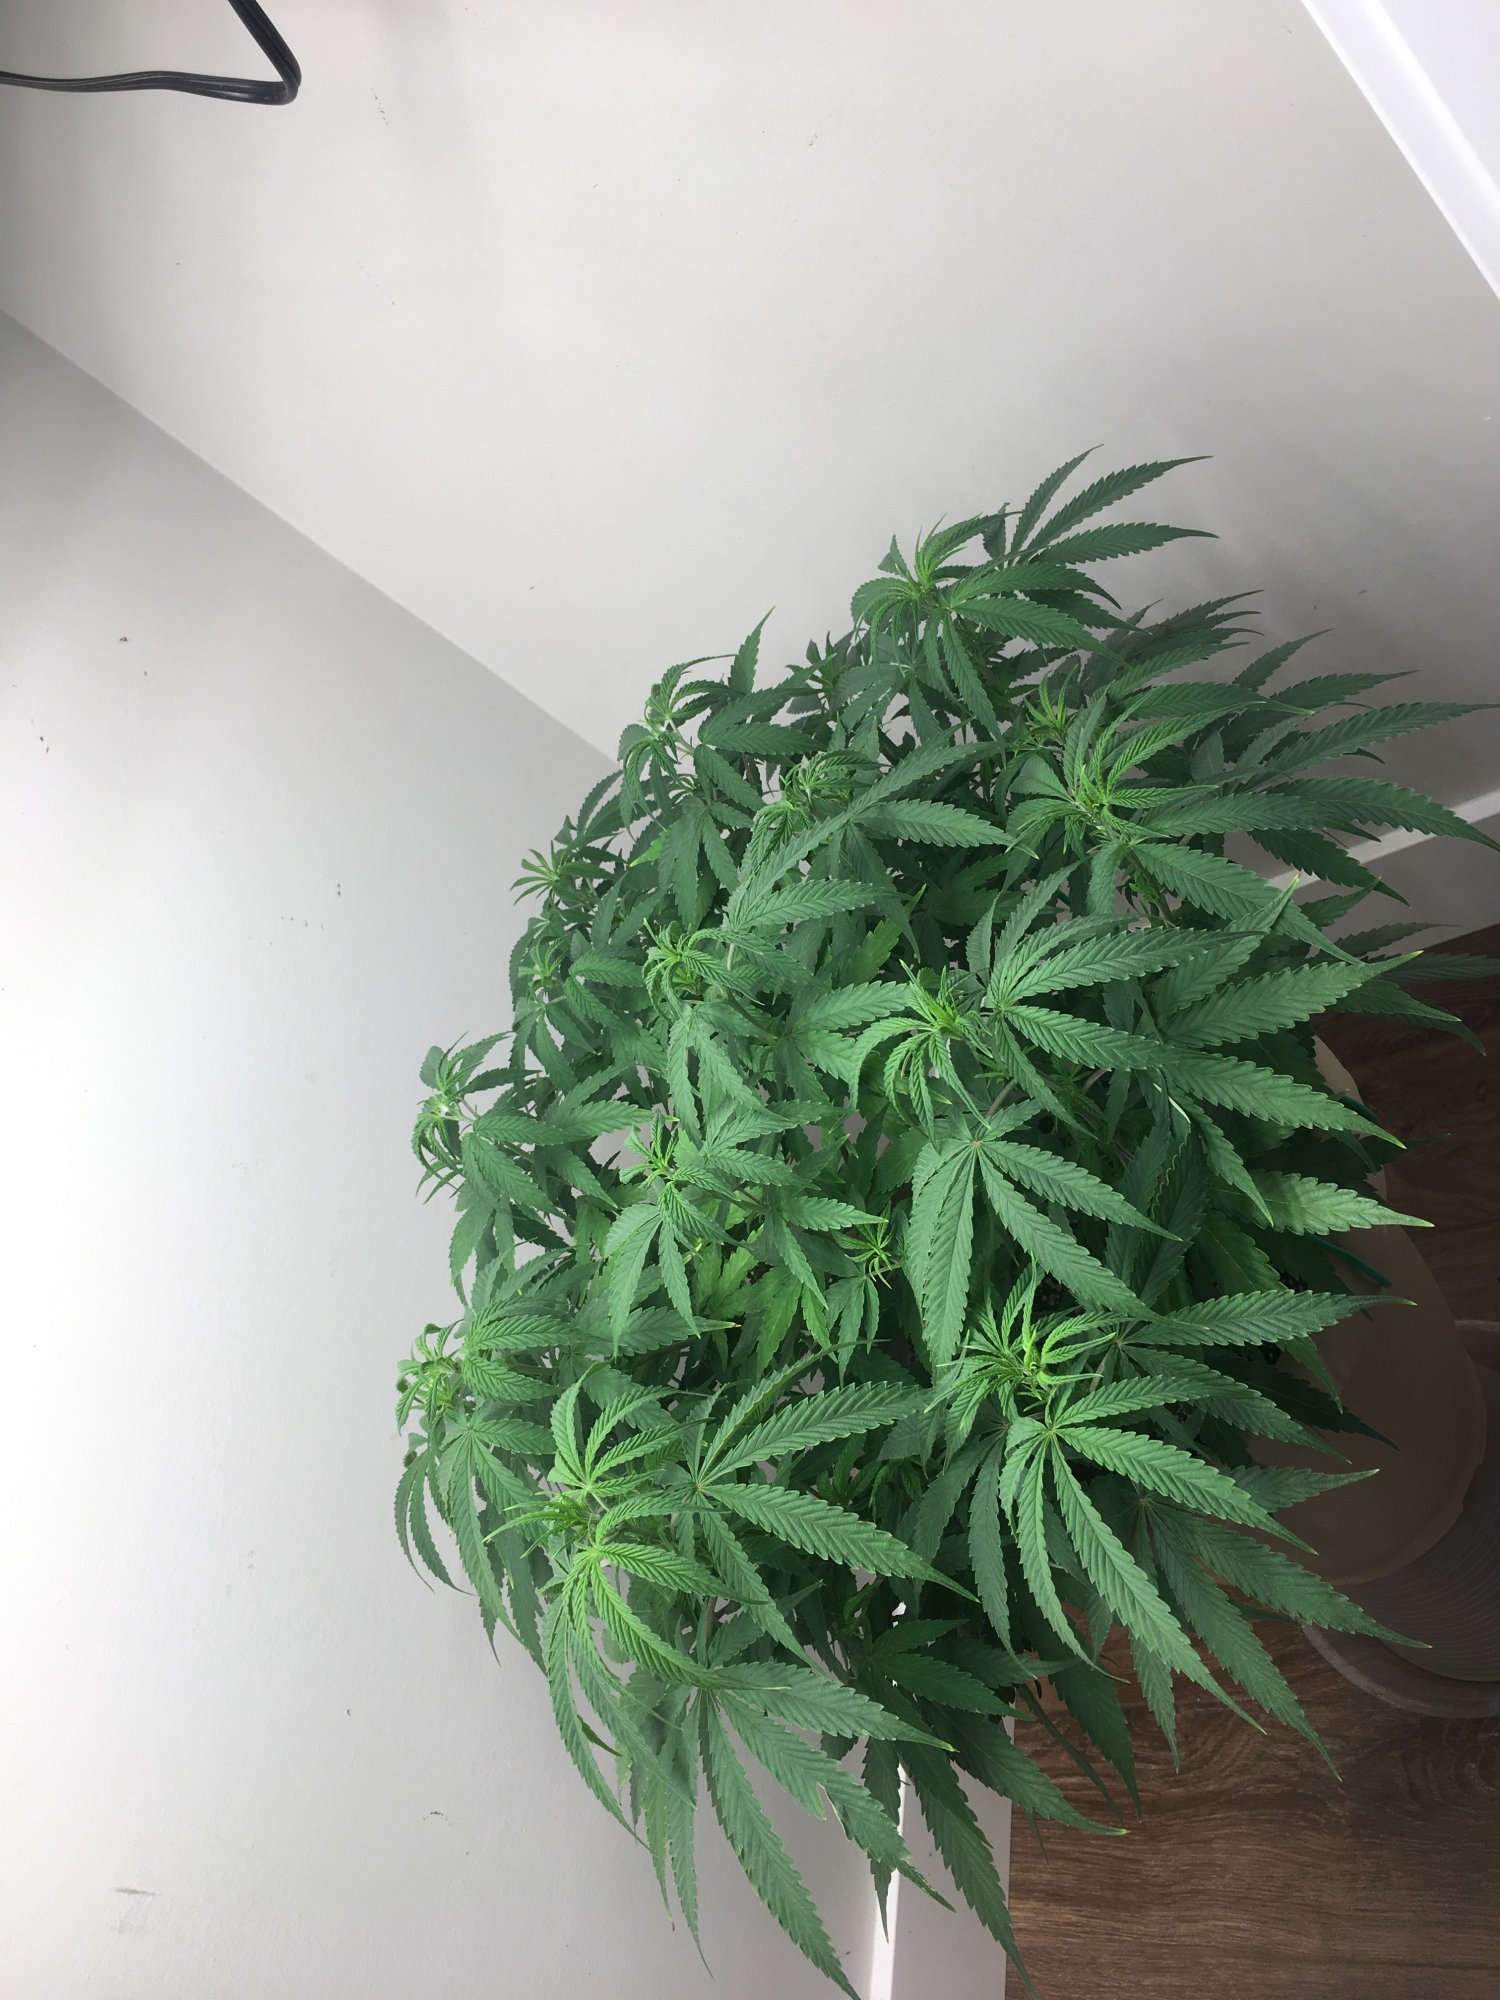 Need help with transplanting a plant